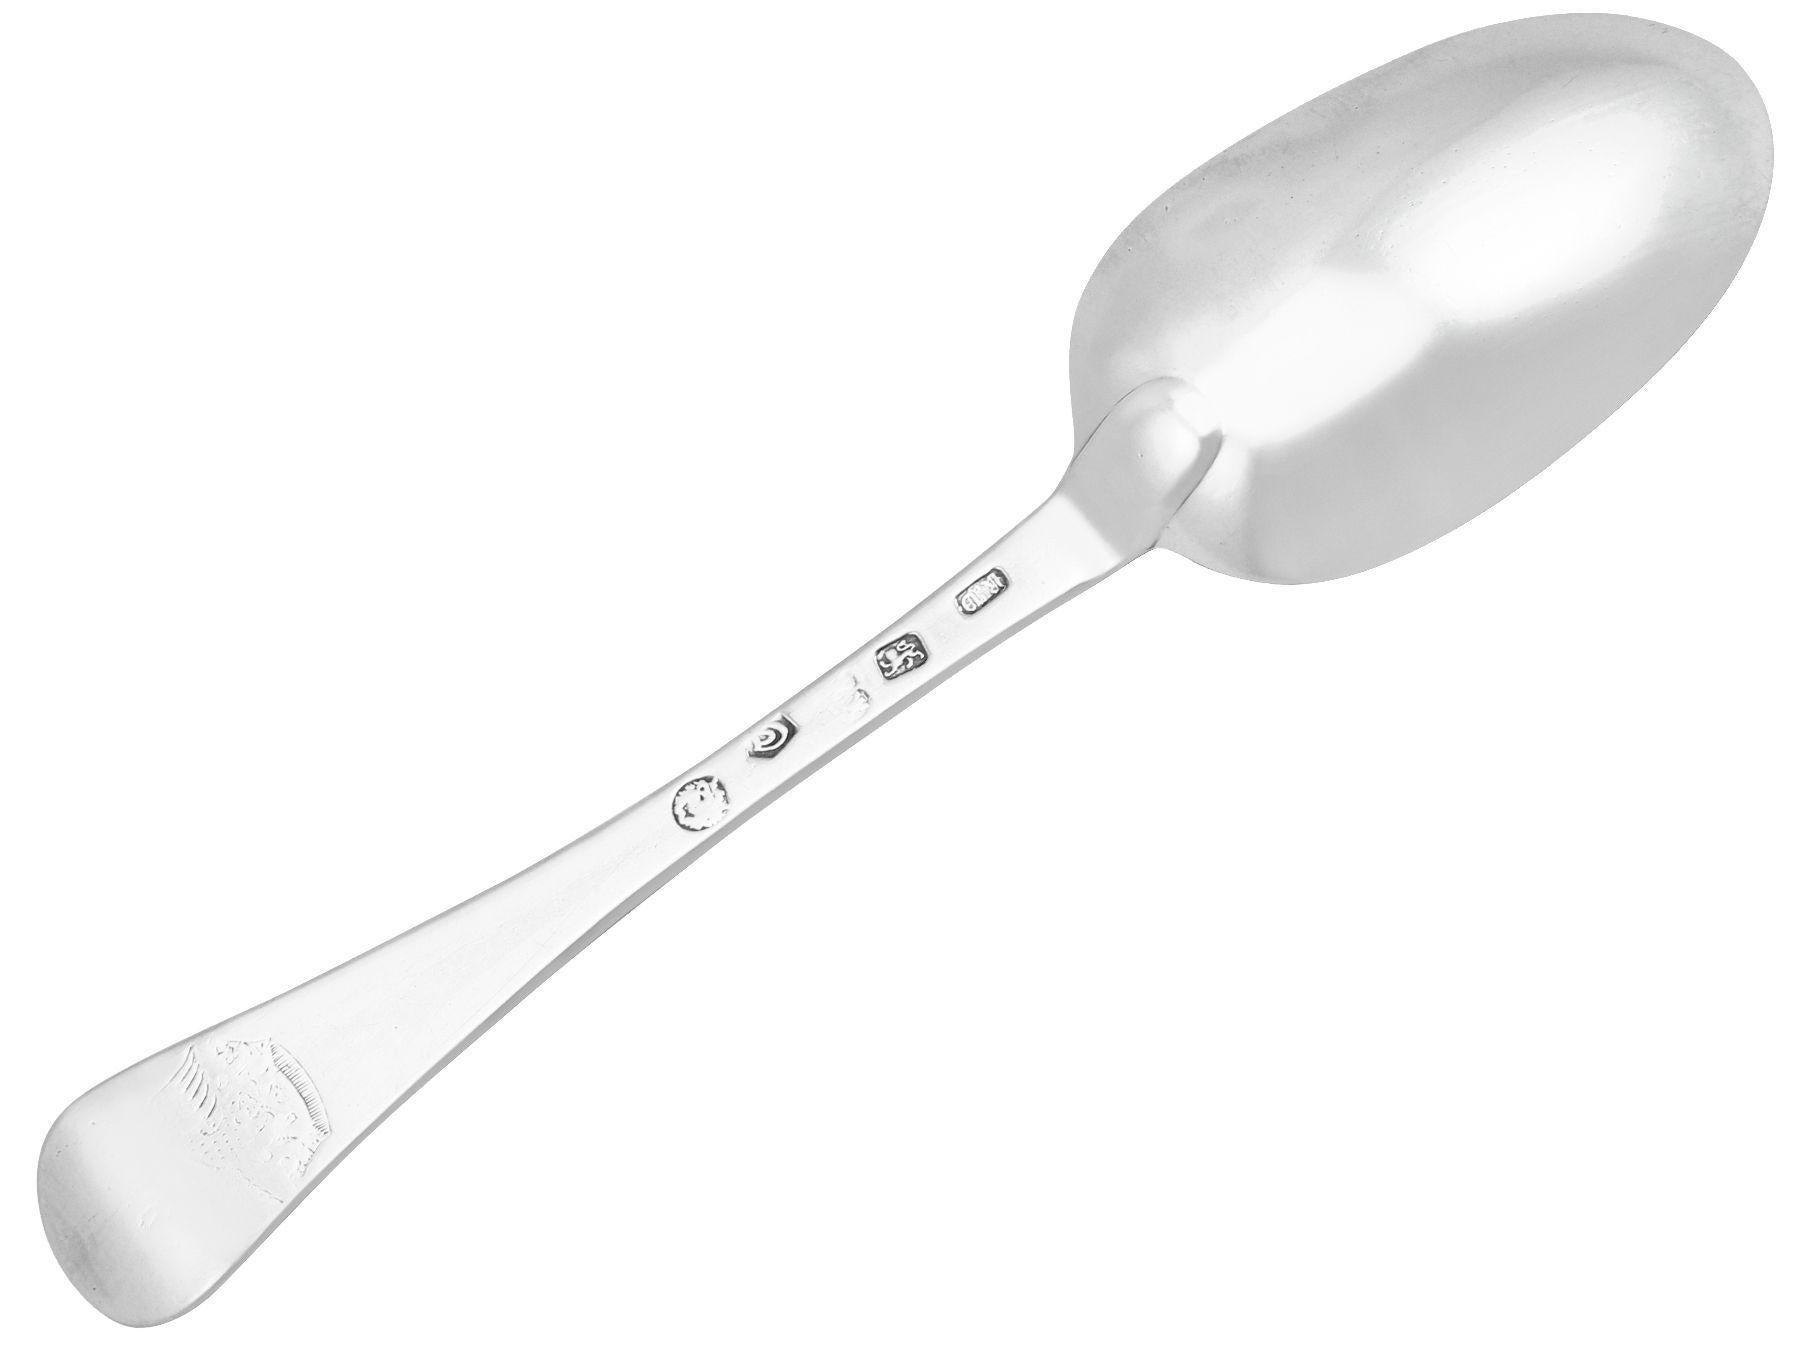 An exceptional, fine and impressive, antique Georgian sterling silver Hanoverian pattern table spoon; an addition to our 18th century silver flatware collection

This exceptional antique Georgian sterling silver spoon has been crafted in the